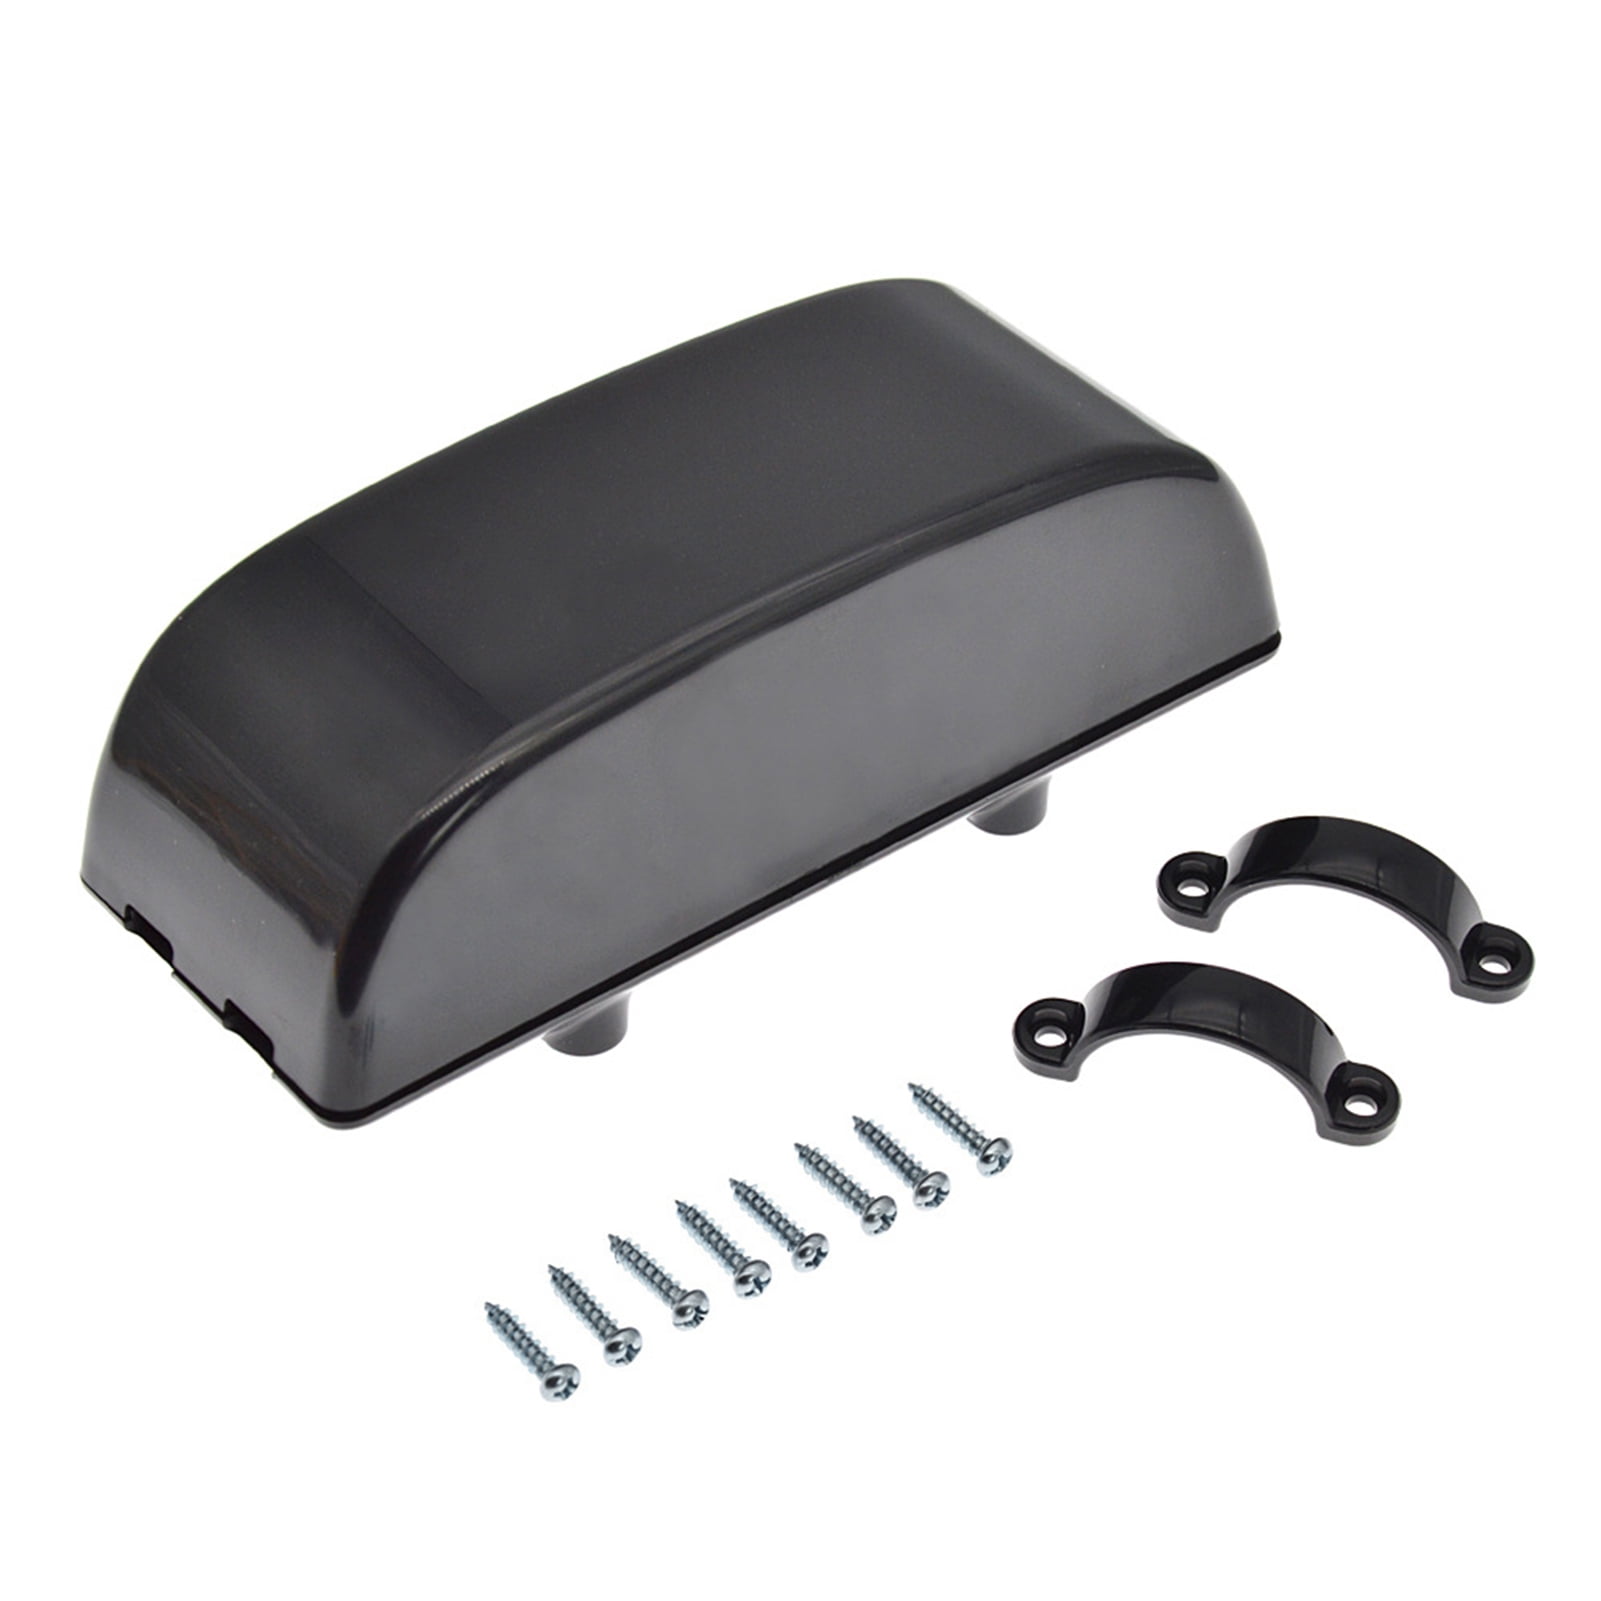 Extra-Large Plastic Controller Box for Electric Bike eBike Moped Scooter Case